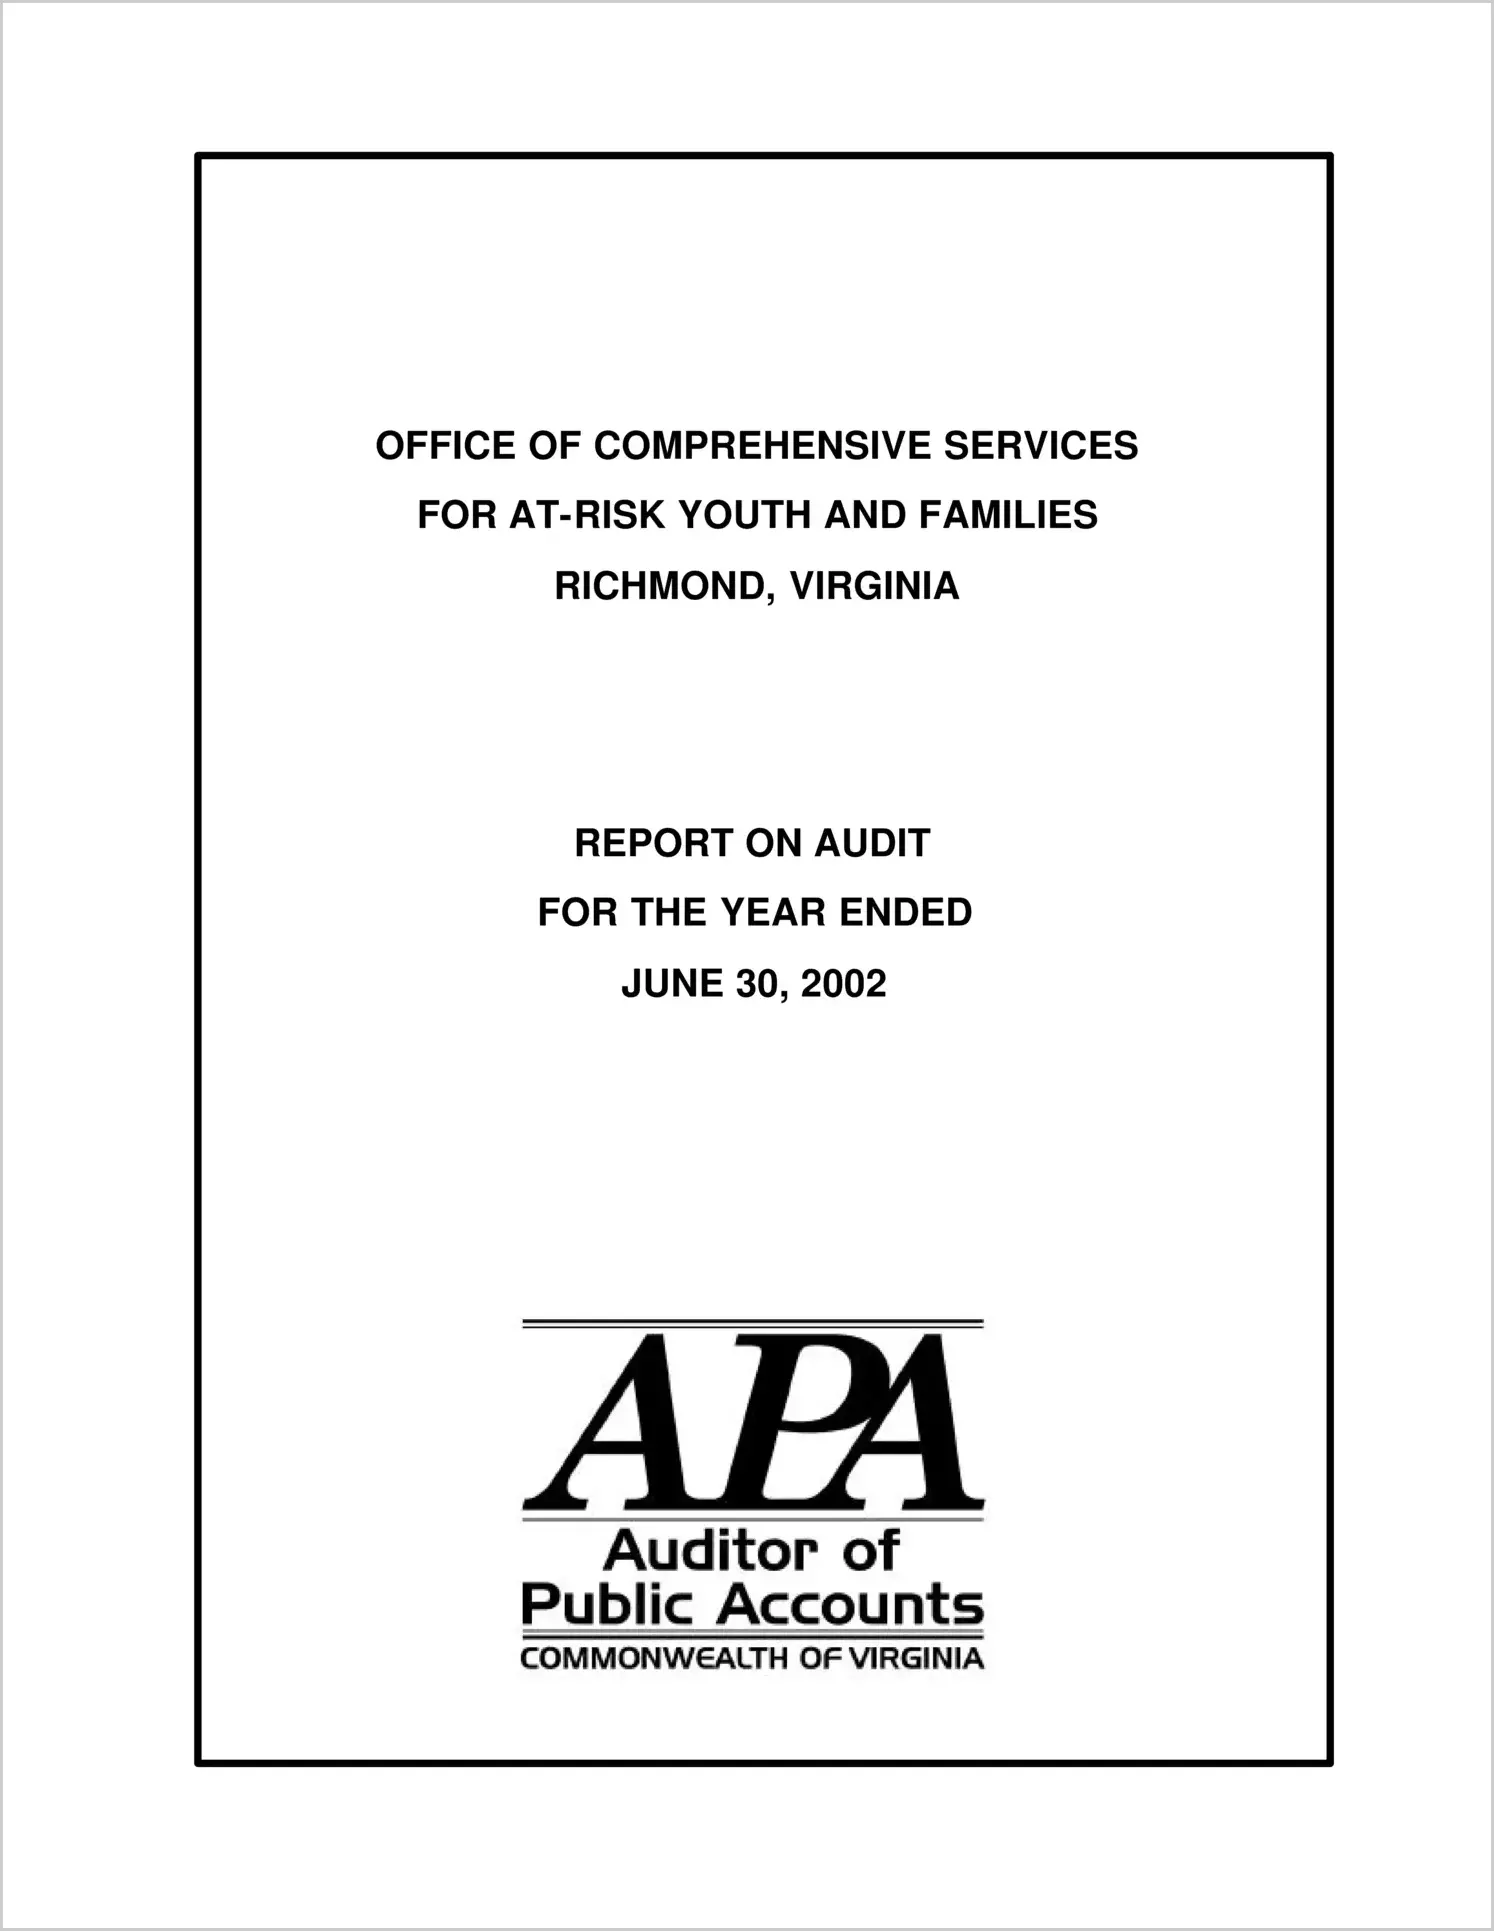 Office of Comprehensive Services for At-Risk Youth and Families for the year ended June 30, 2002